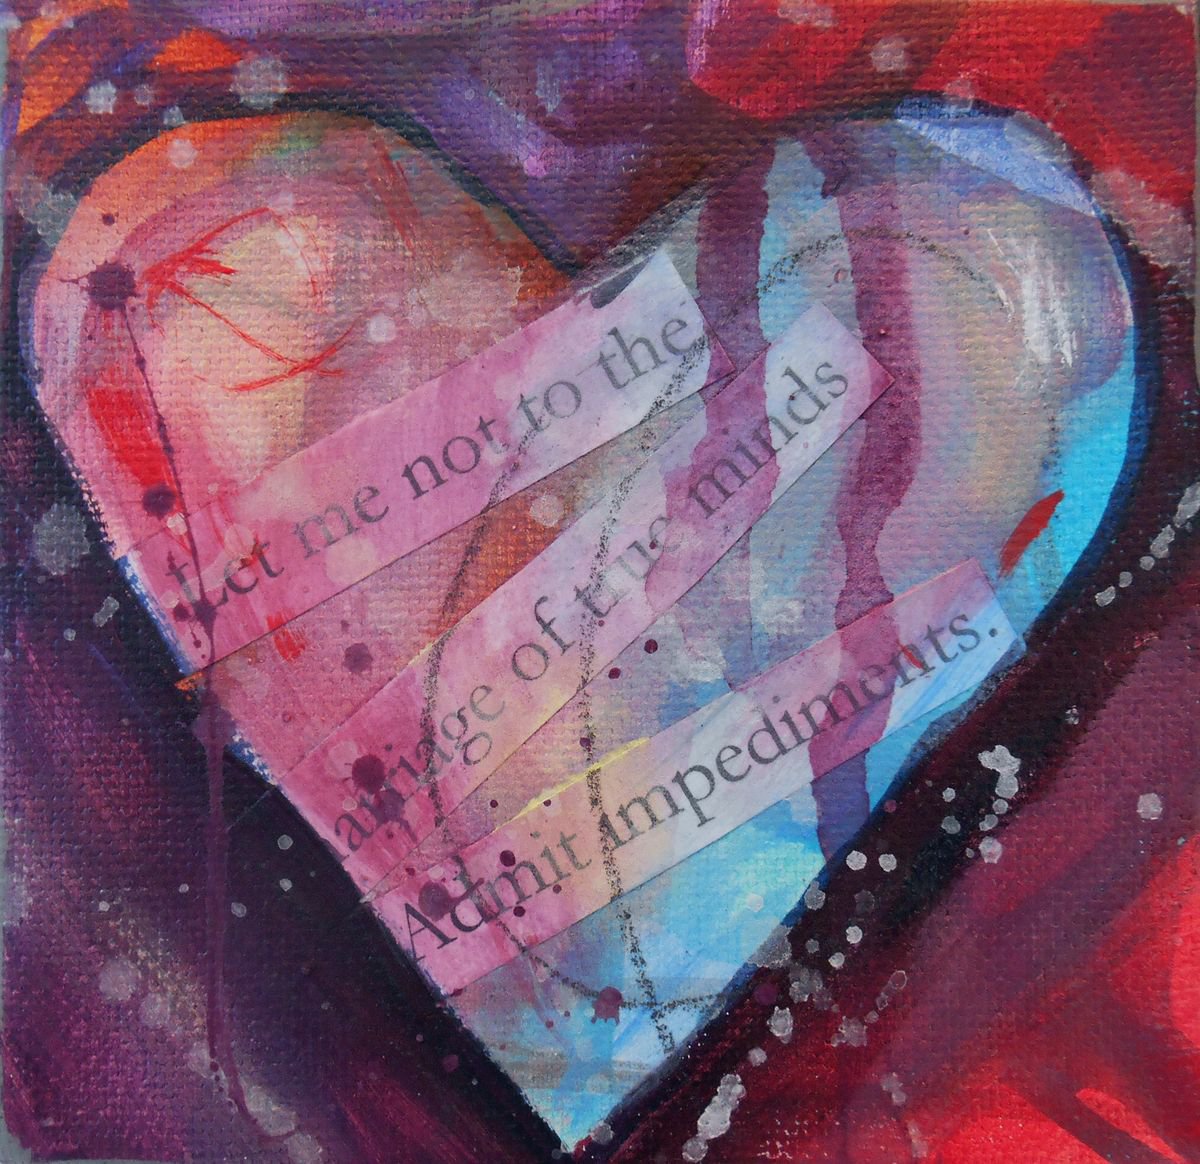 Marriage of True Minds - Abstract Art - 4 x 4 IN / 10 x 10 CM - Mini Heart Painting on Can... by Cynthia Ligeros Abstract Artist